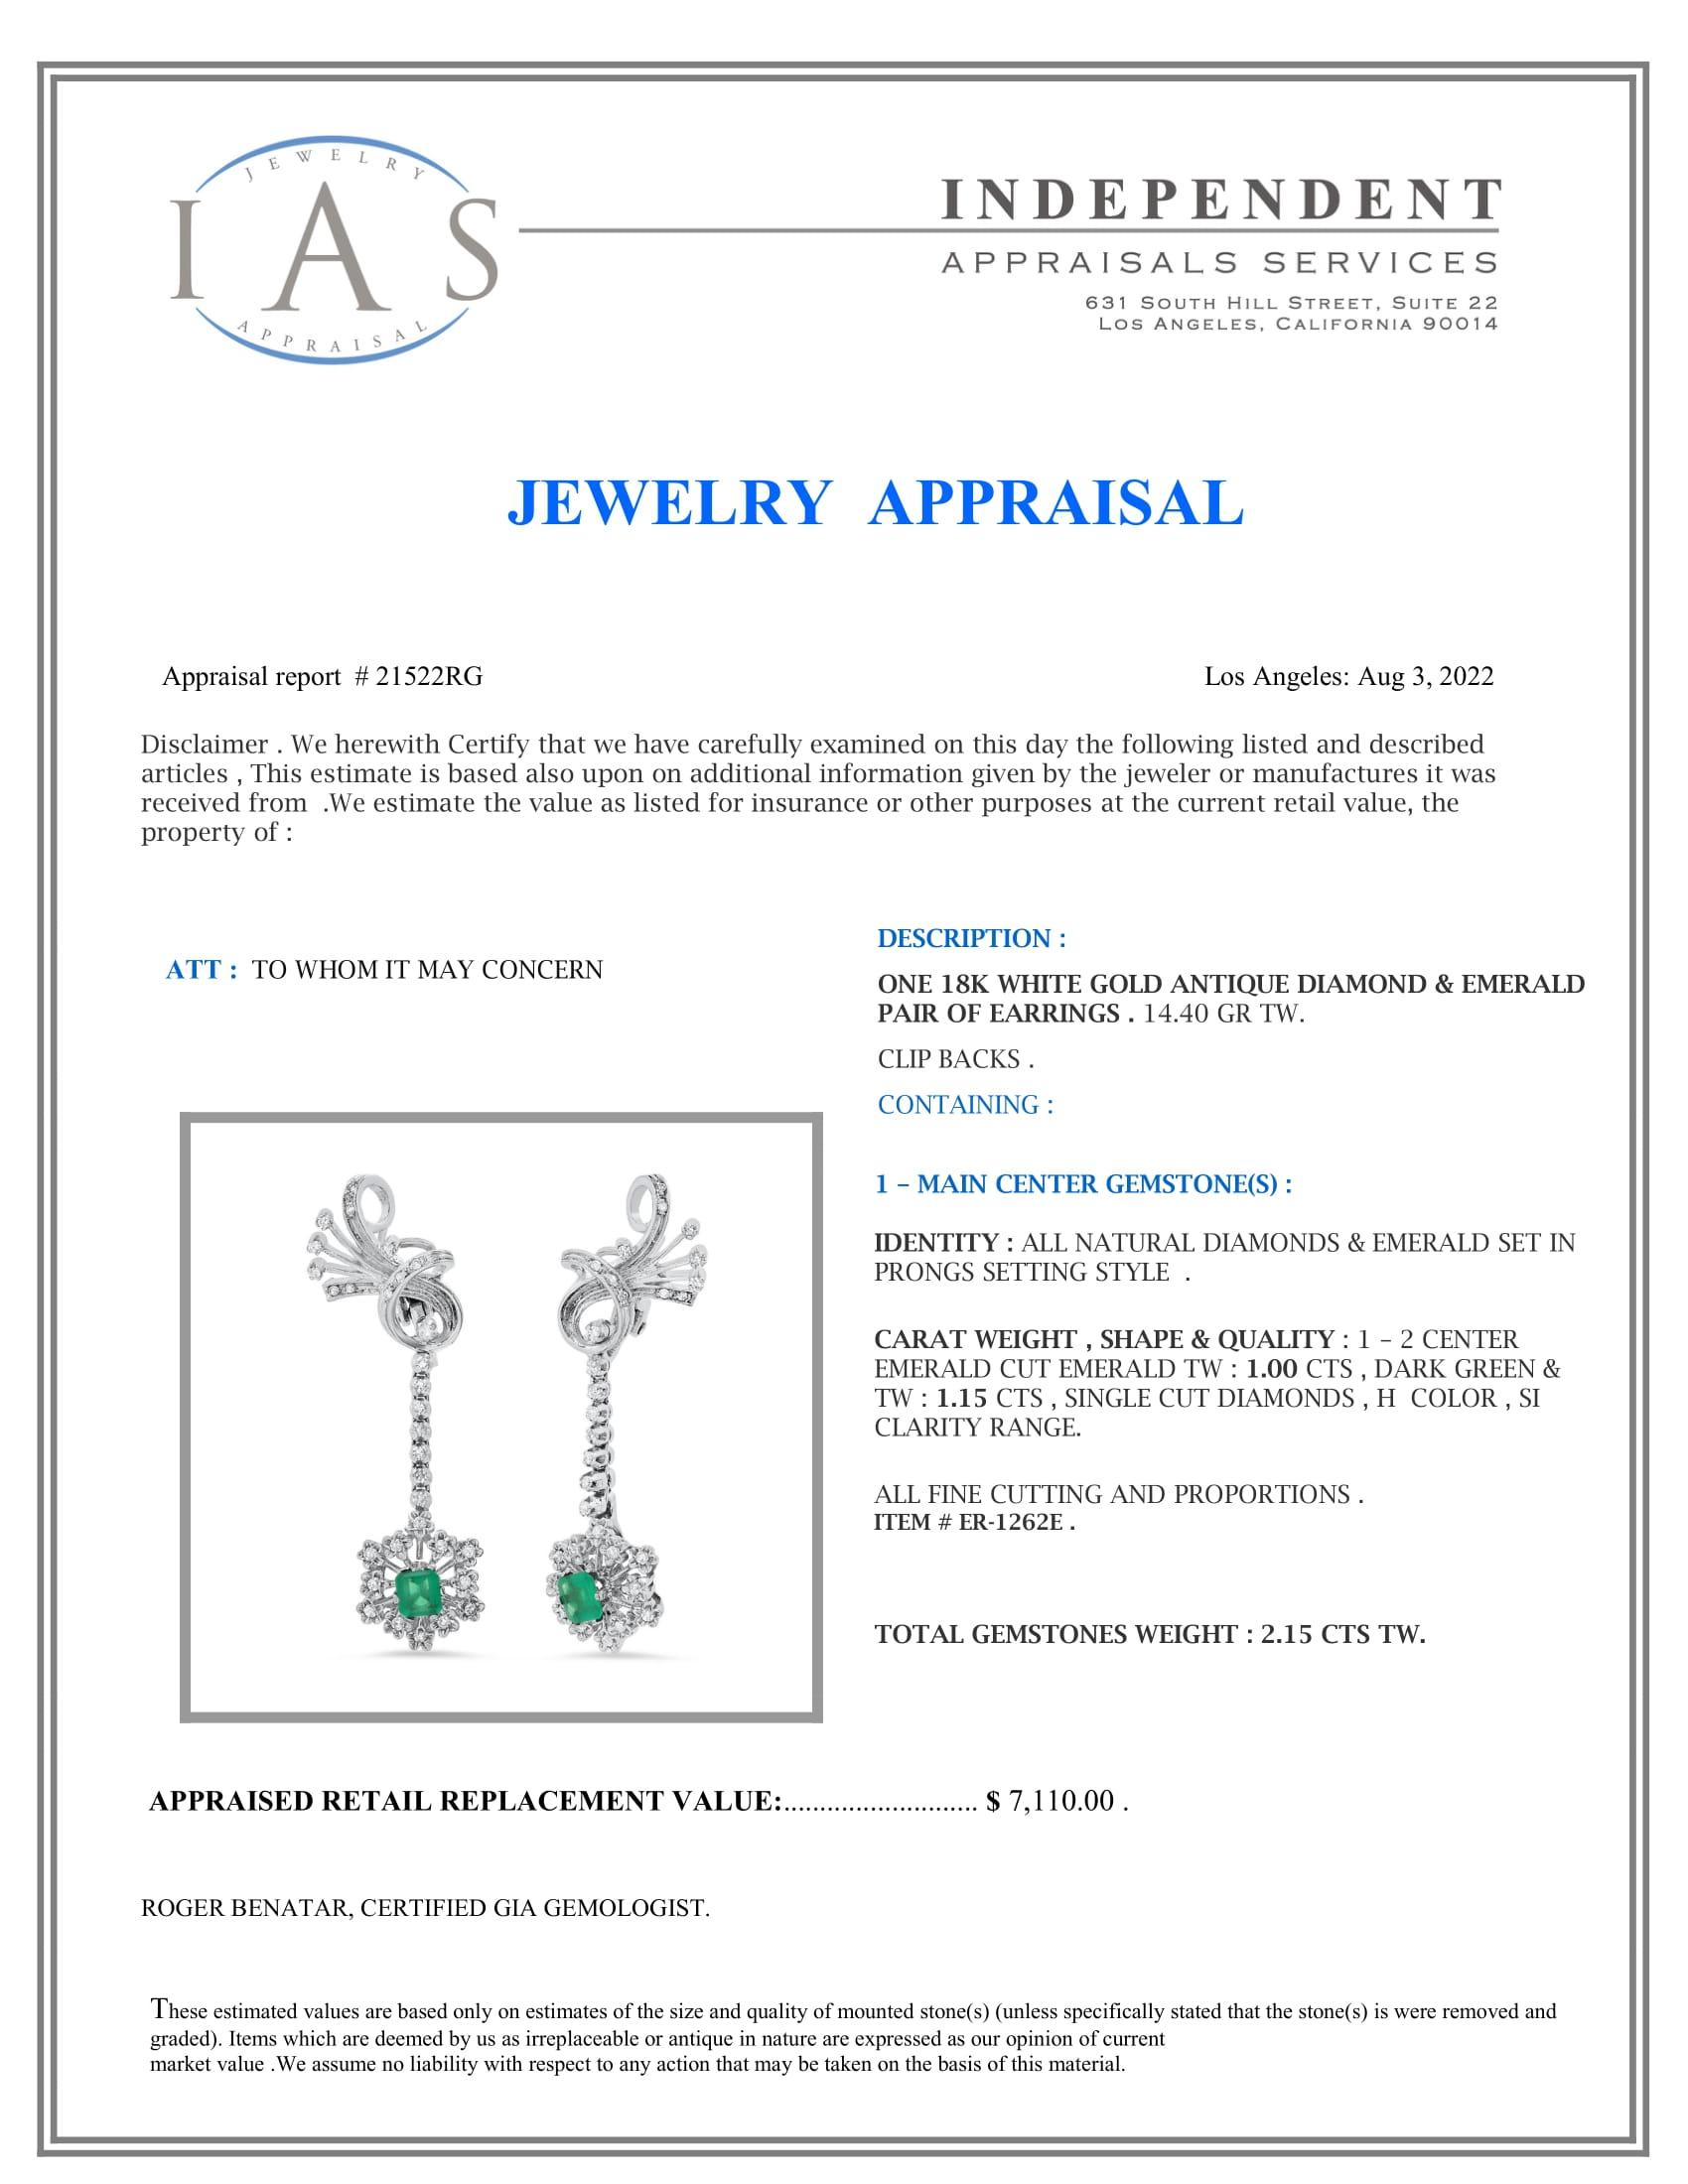 14K White Gold Setting with 1.0ct Emerald and 1.15ct Diamond Earrings